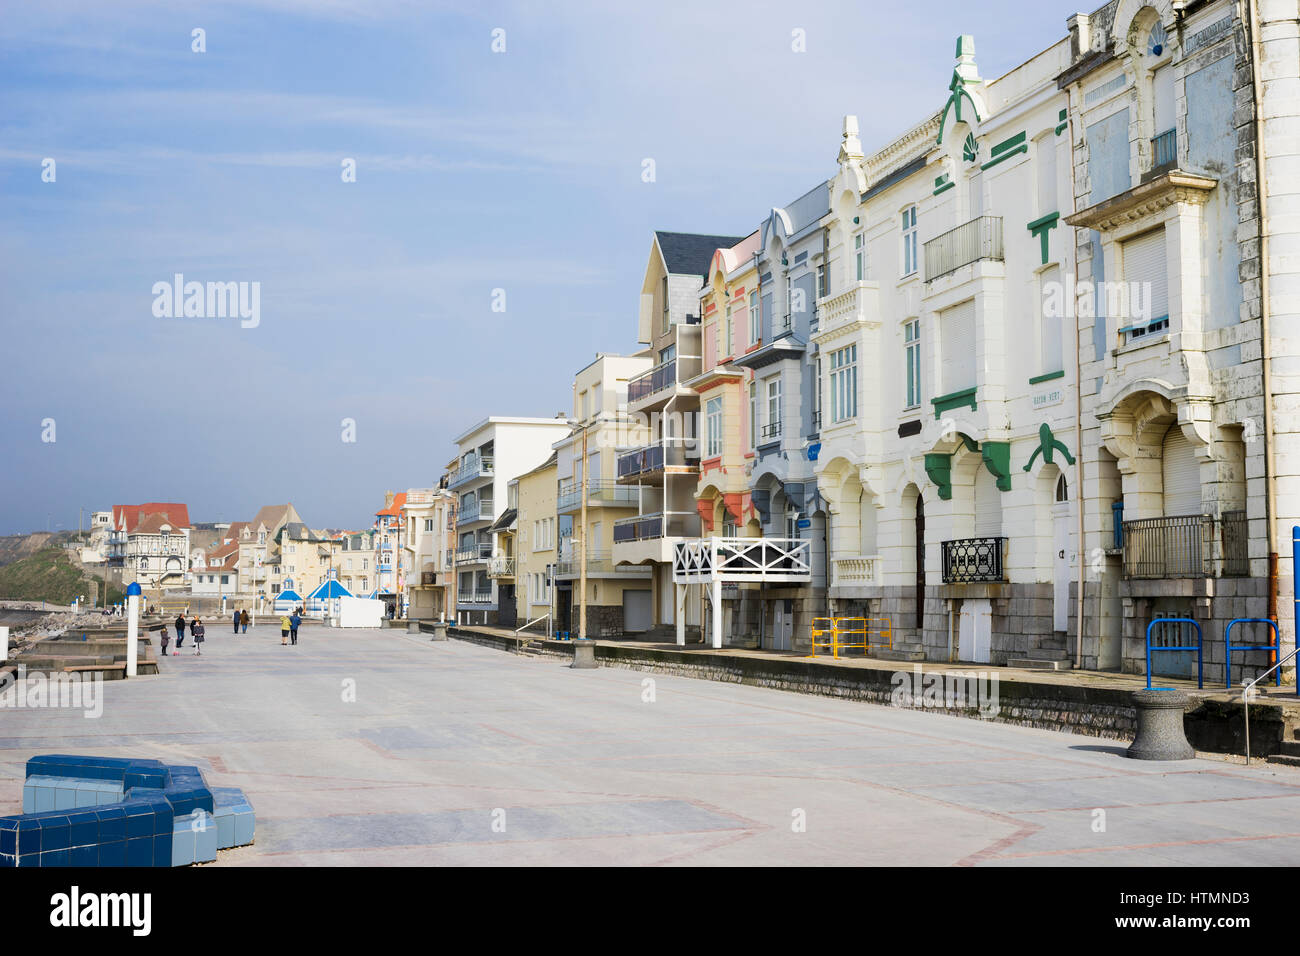 Sea front promenade with belle epoque architecture in Wimereux, Cote d' Opale, France Stock Photo